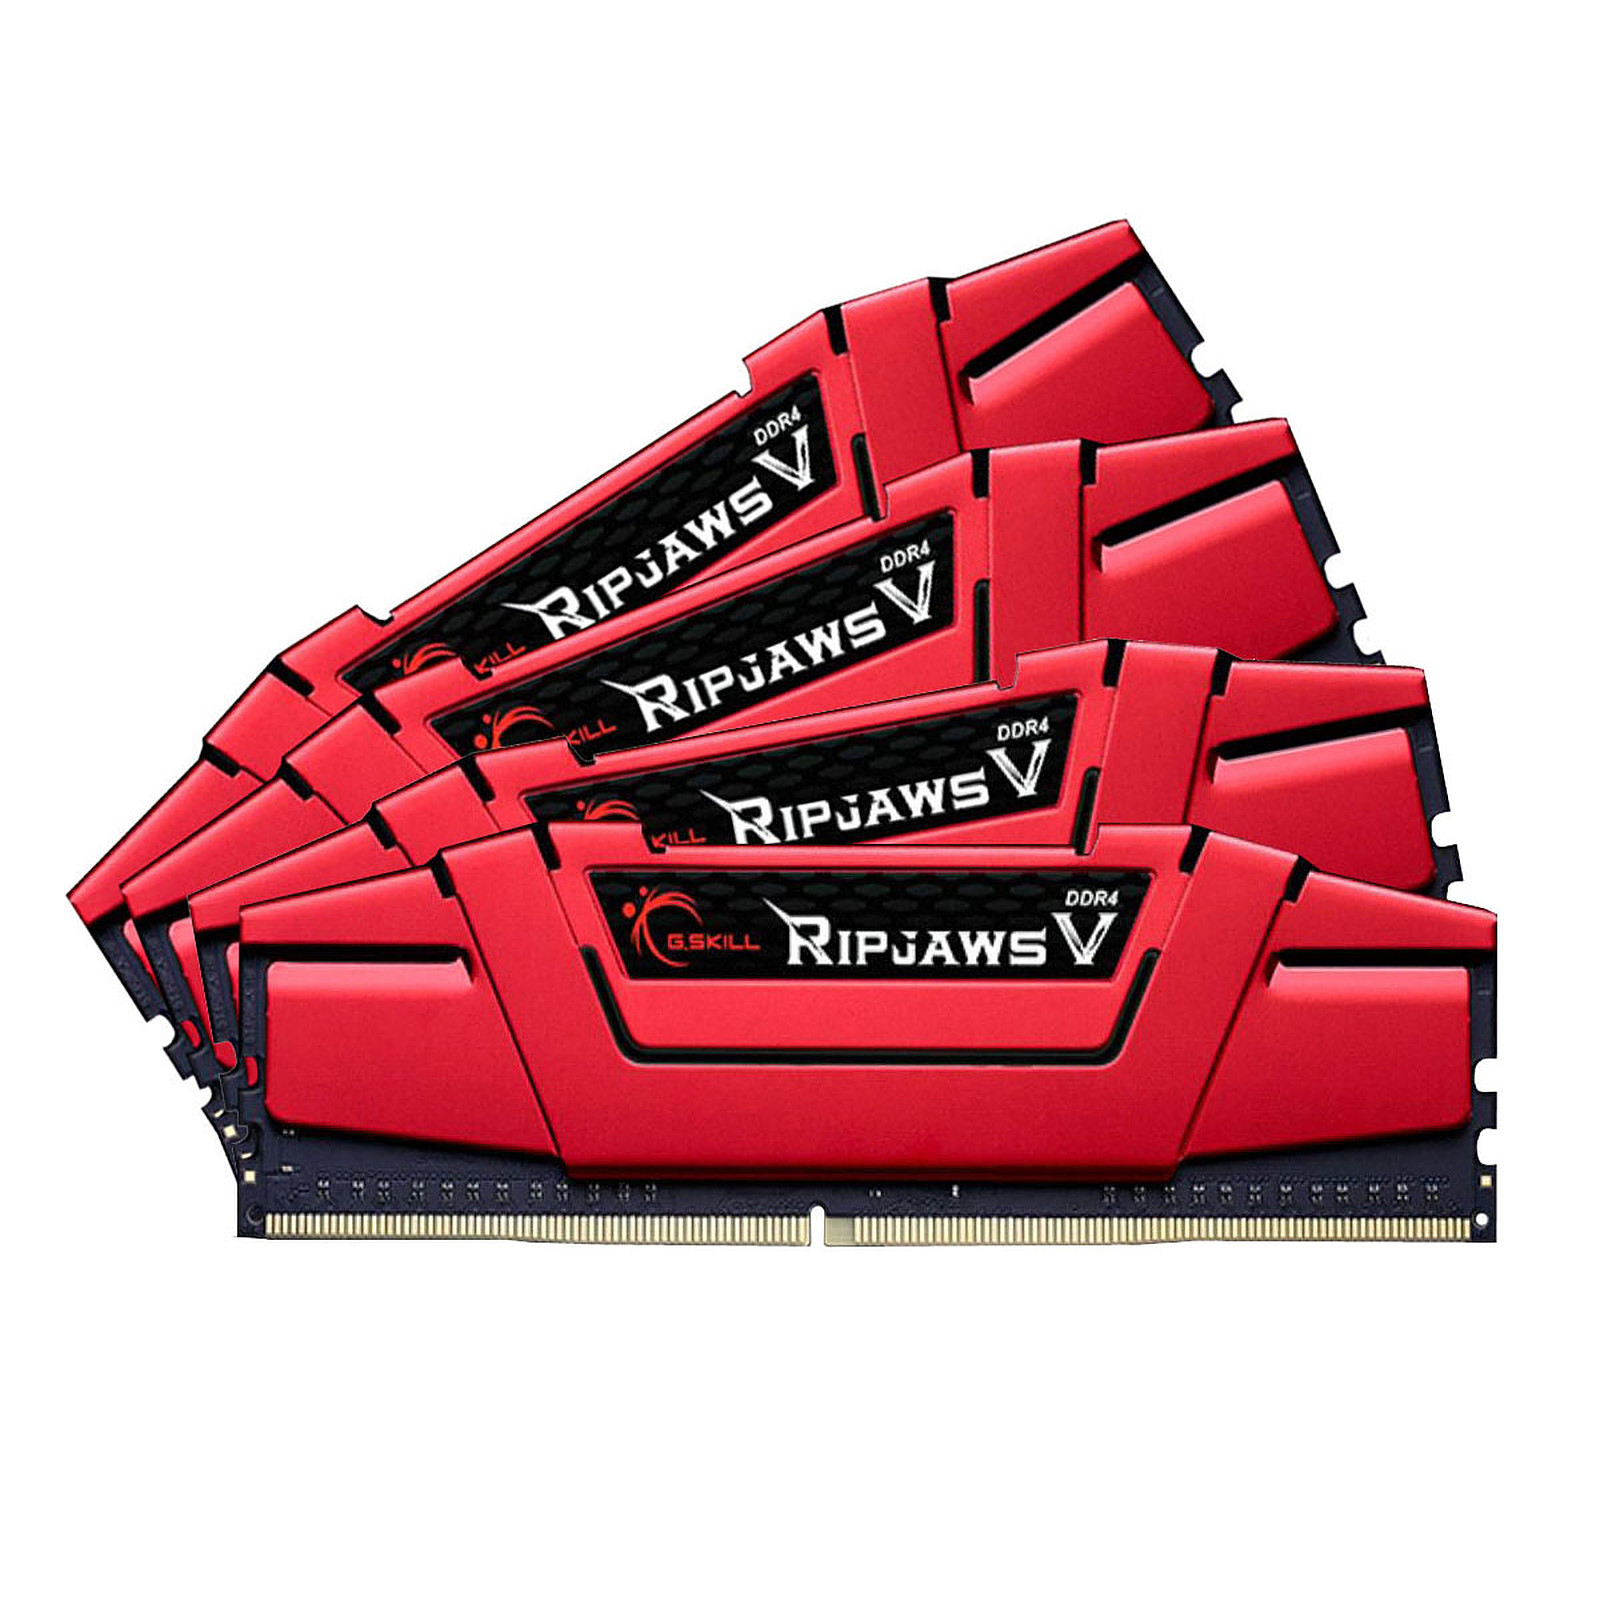 G.Skill RipJaws 5 Series Rouge 32 Go (4x 8 Go) DDR4 2133 MHz CL15 - Memoire PC G.Skill